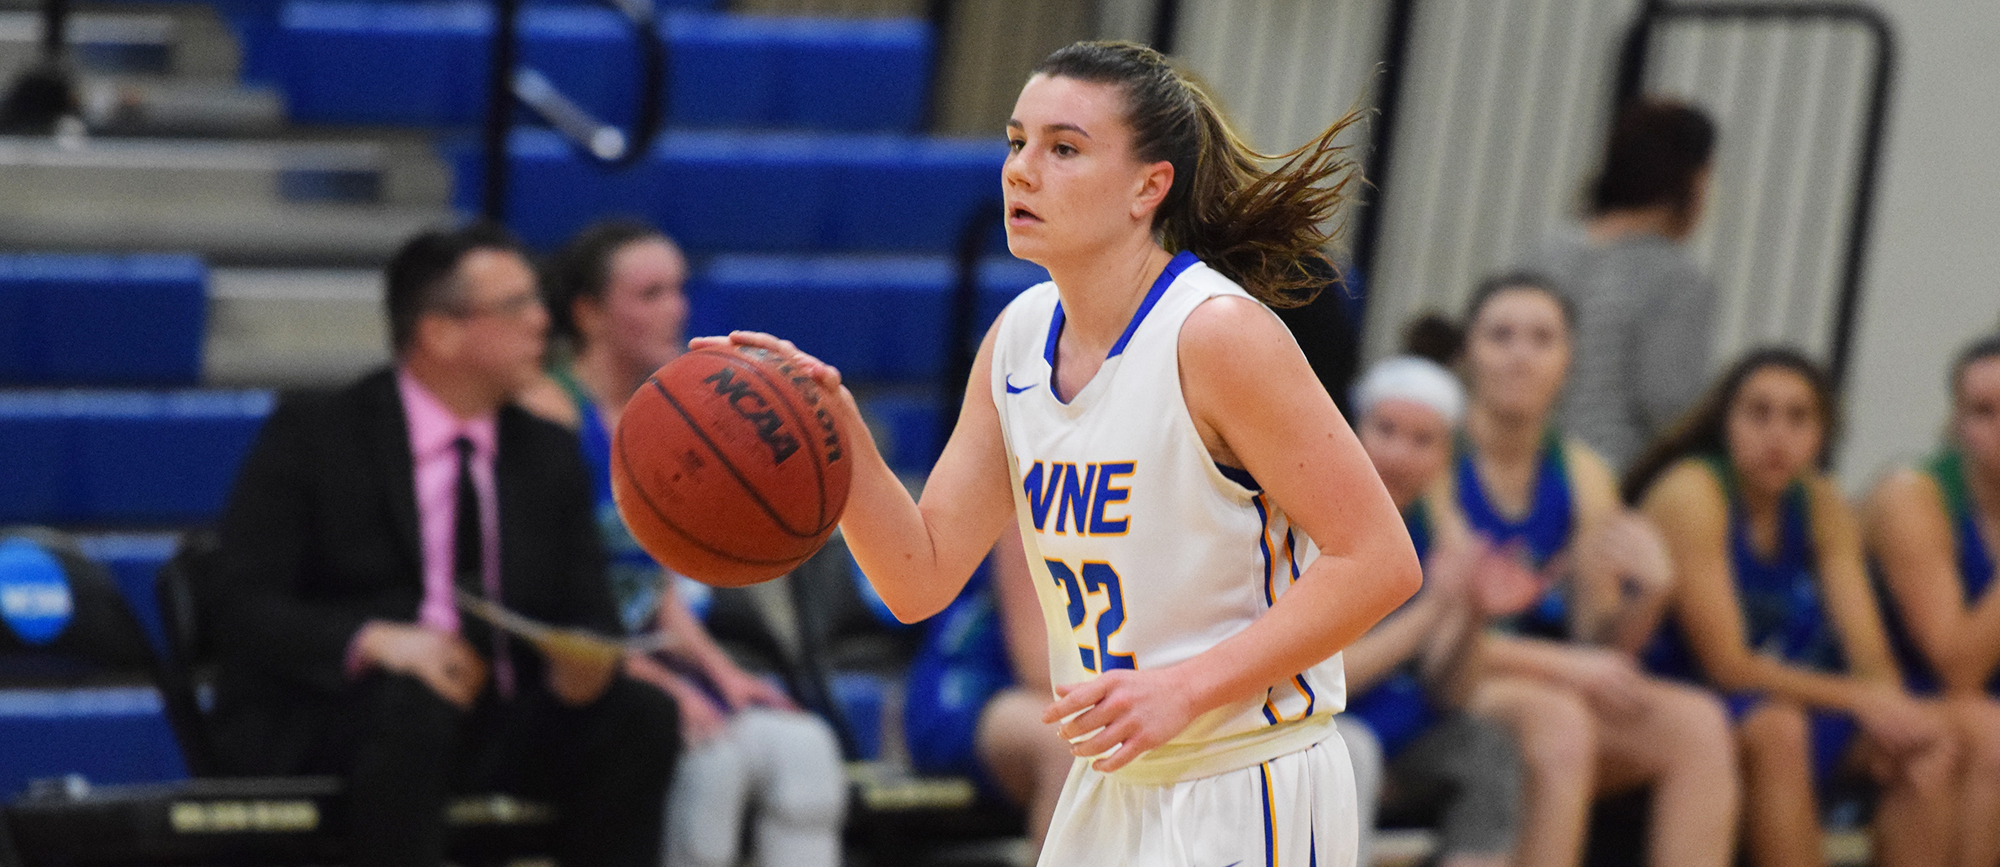 Western New England advanced to the CCC semifinals for the fifth straight season with a 64-52 win over Salve Regina on Tuesday night at the AHLC. (Photo by Rachael Margossian)